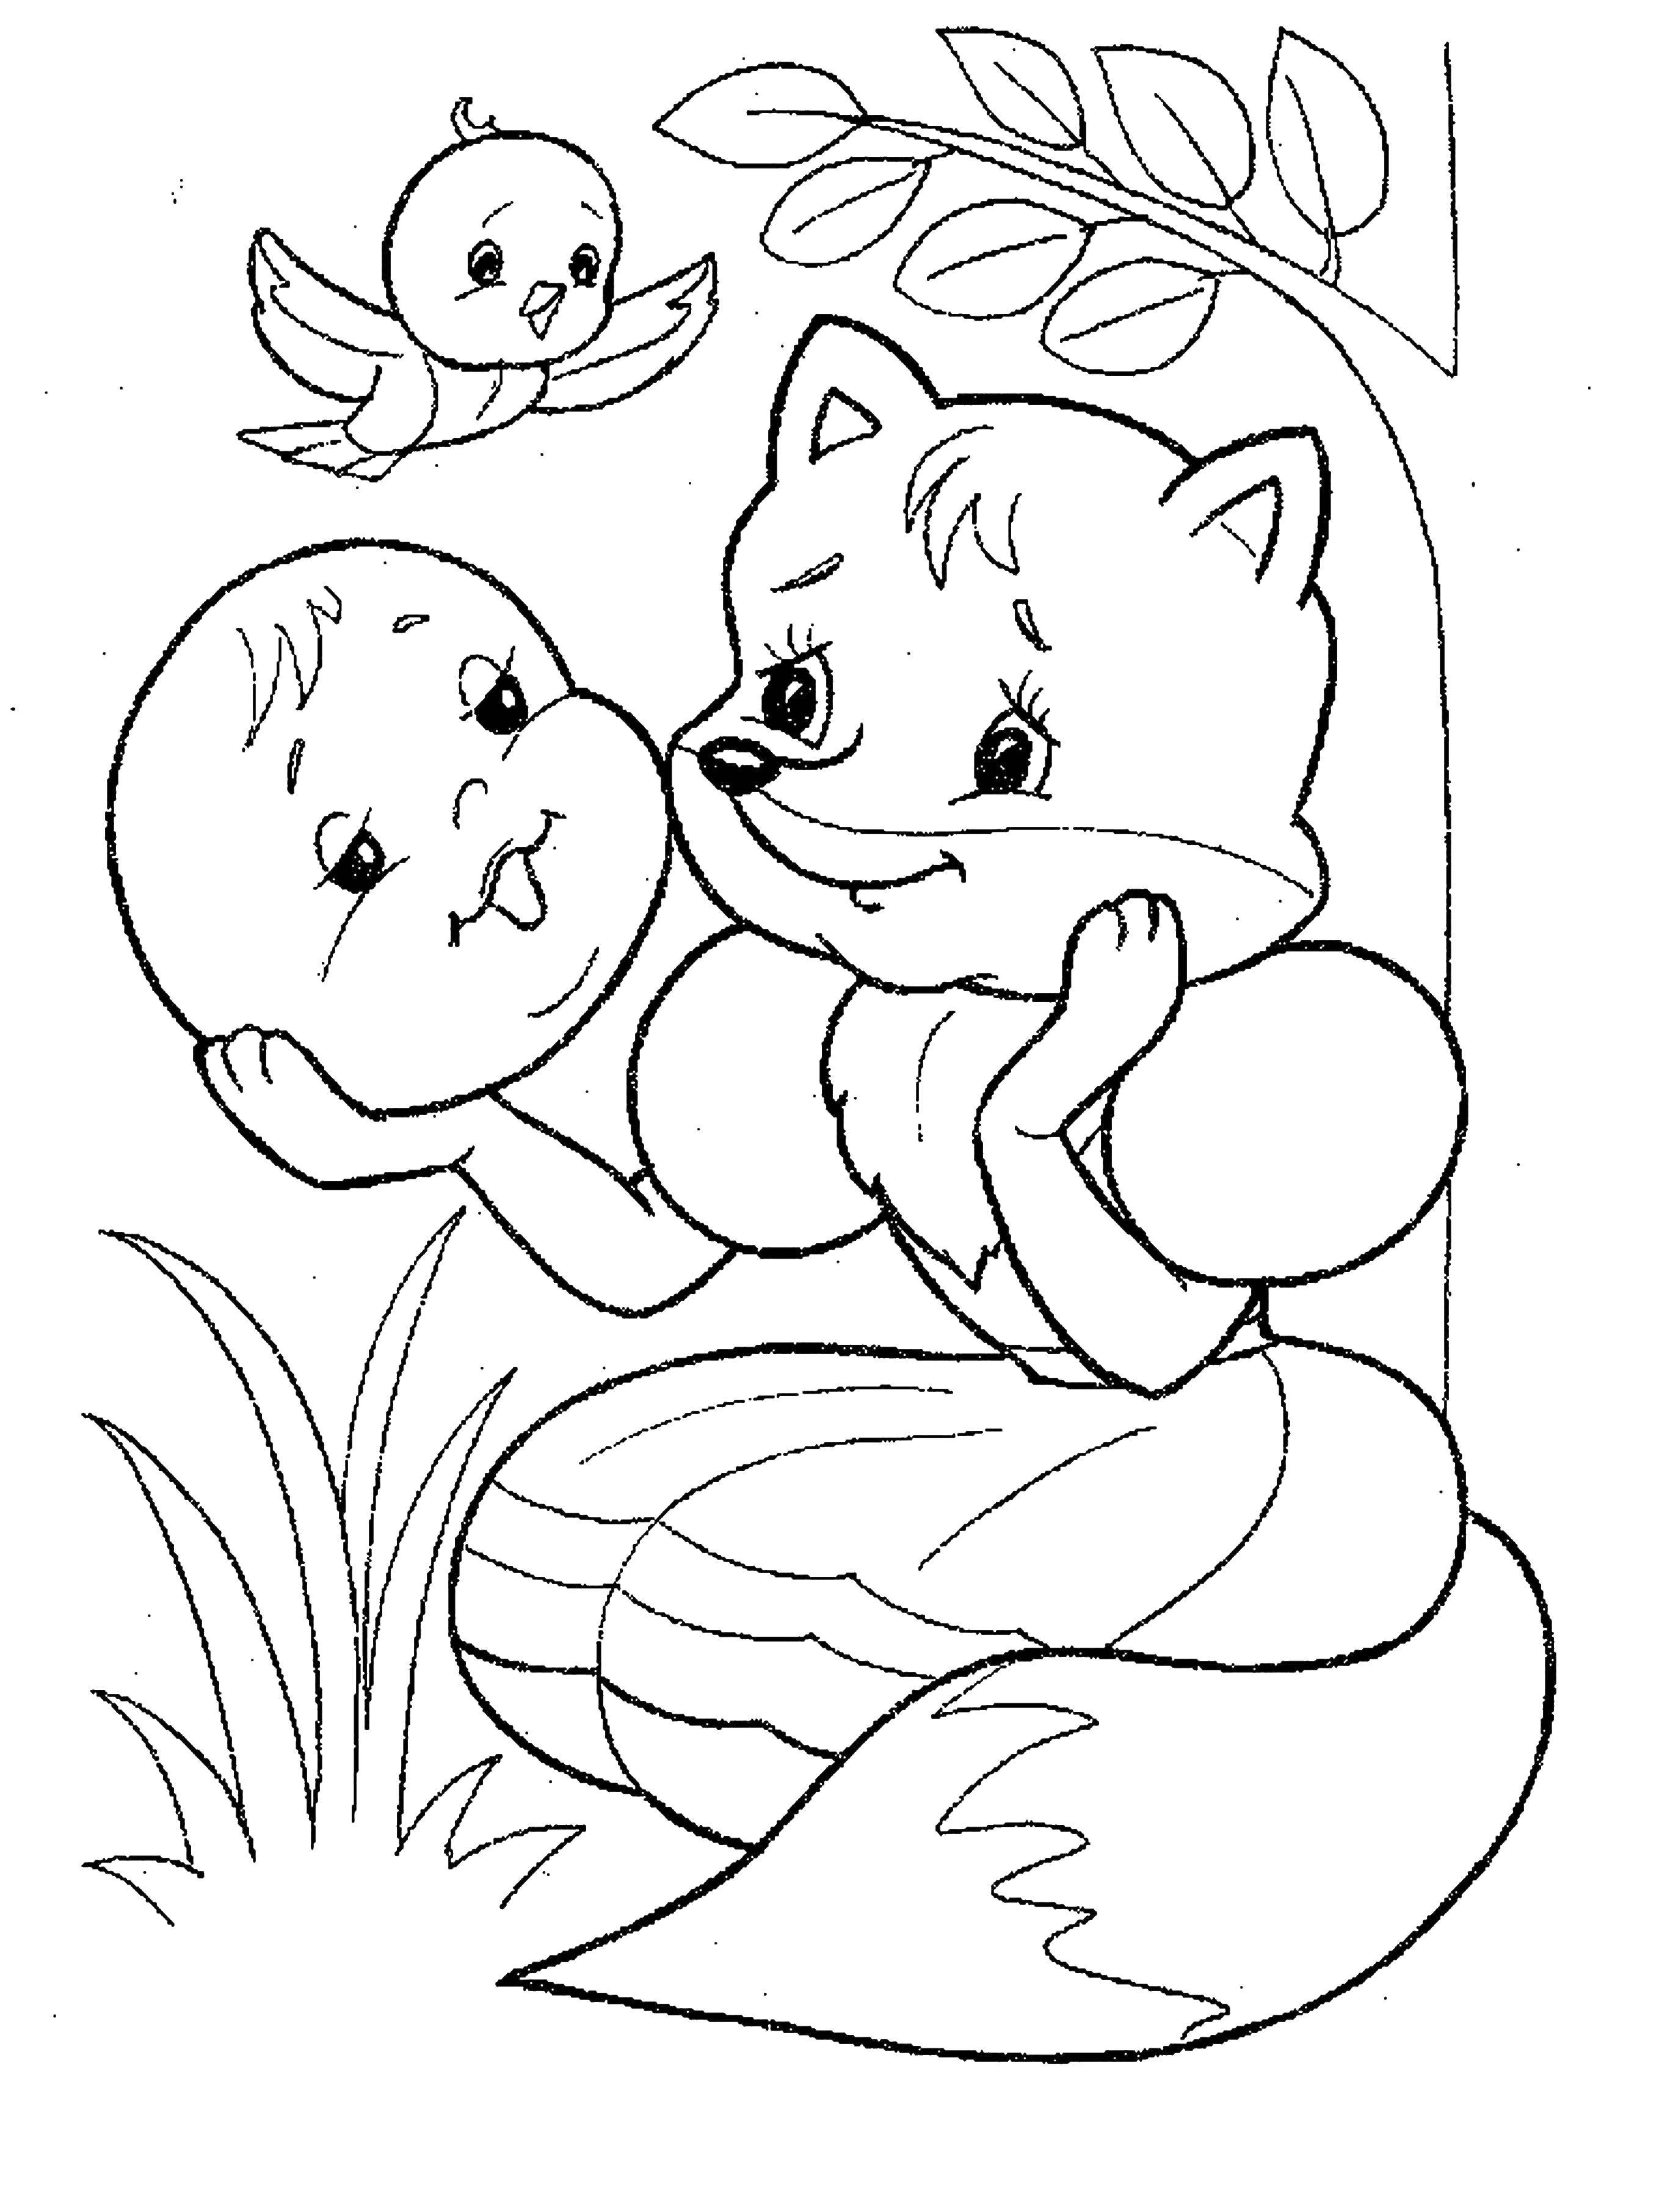 Coloring The gingerbread man and the Fox. Category Fairy tales. Tags:  gingerbread man , Fox.